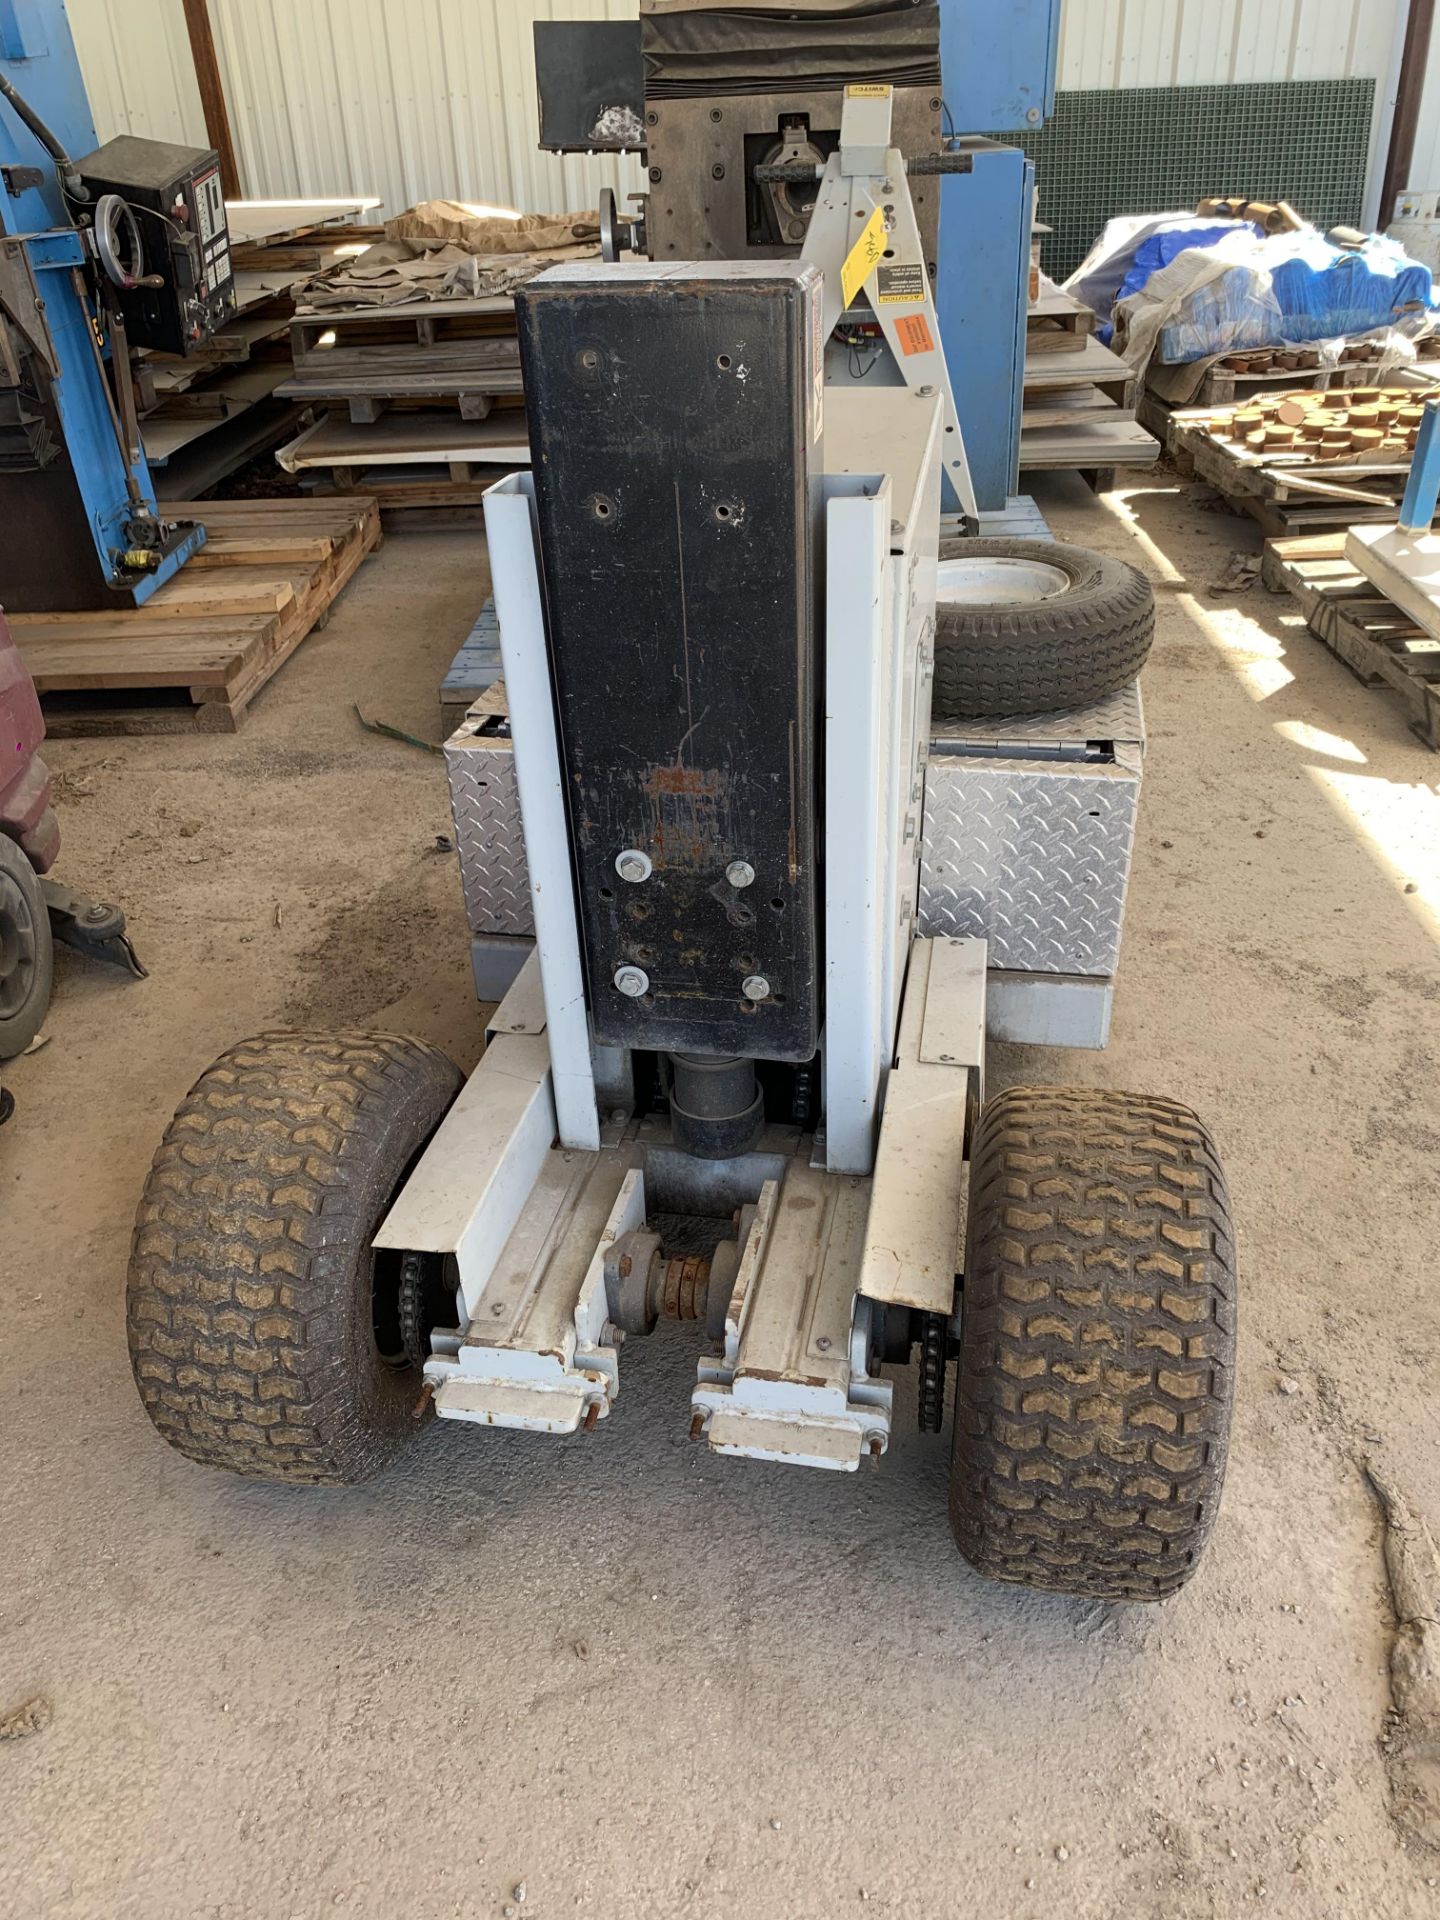 PowerMover PM6900 Cart/Trailer Mover (LOCATION: 3421 N Sylvania Ave, Ft Worth TX 76111) - Image 2 of 2